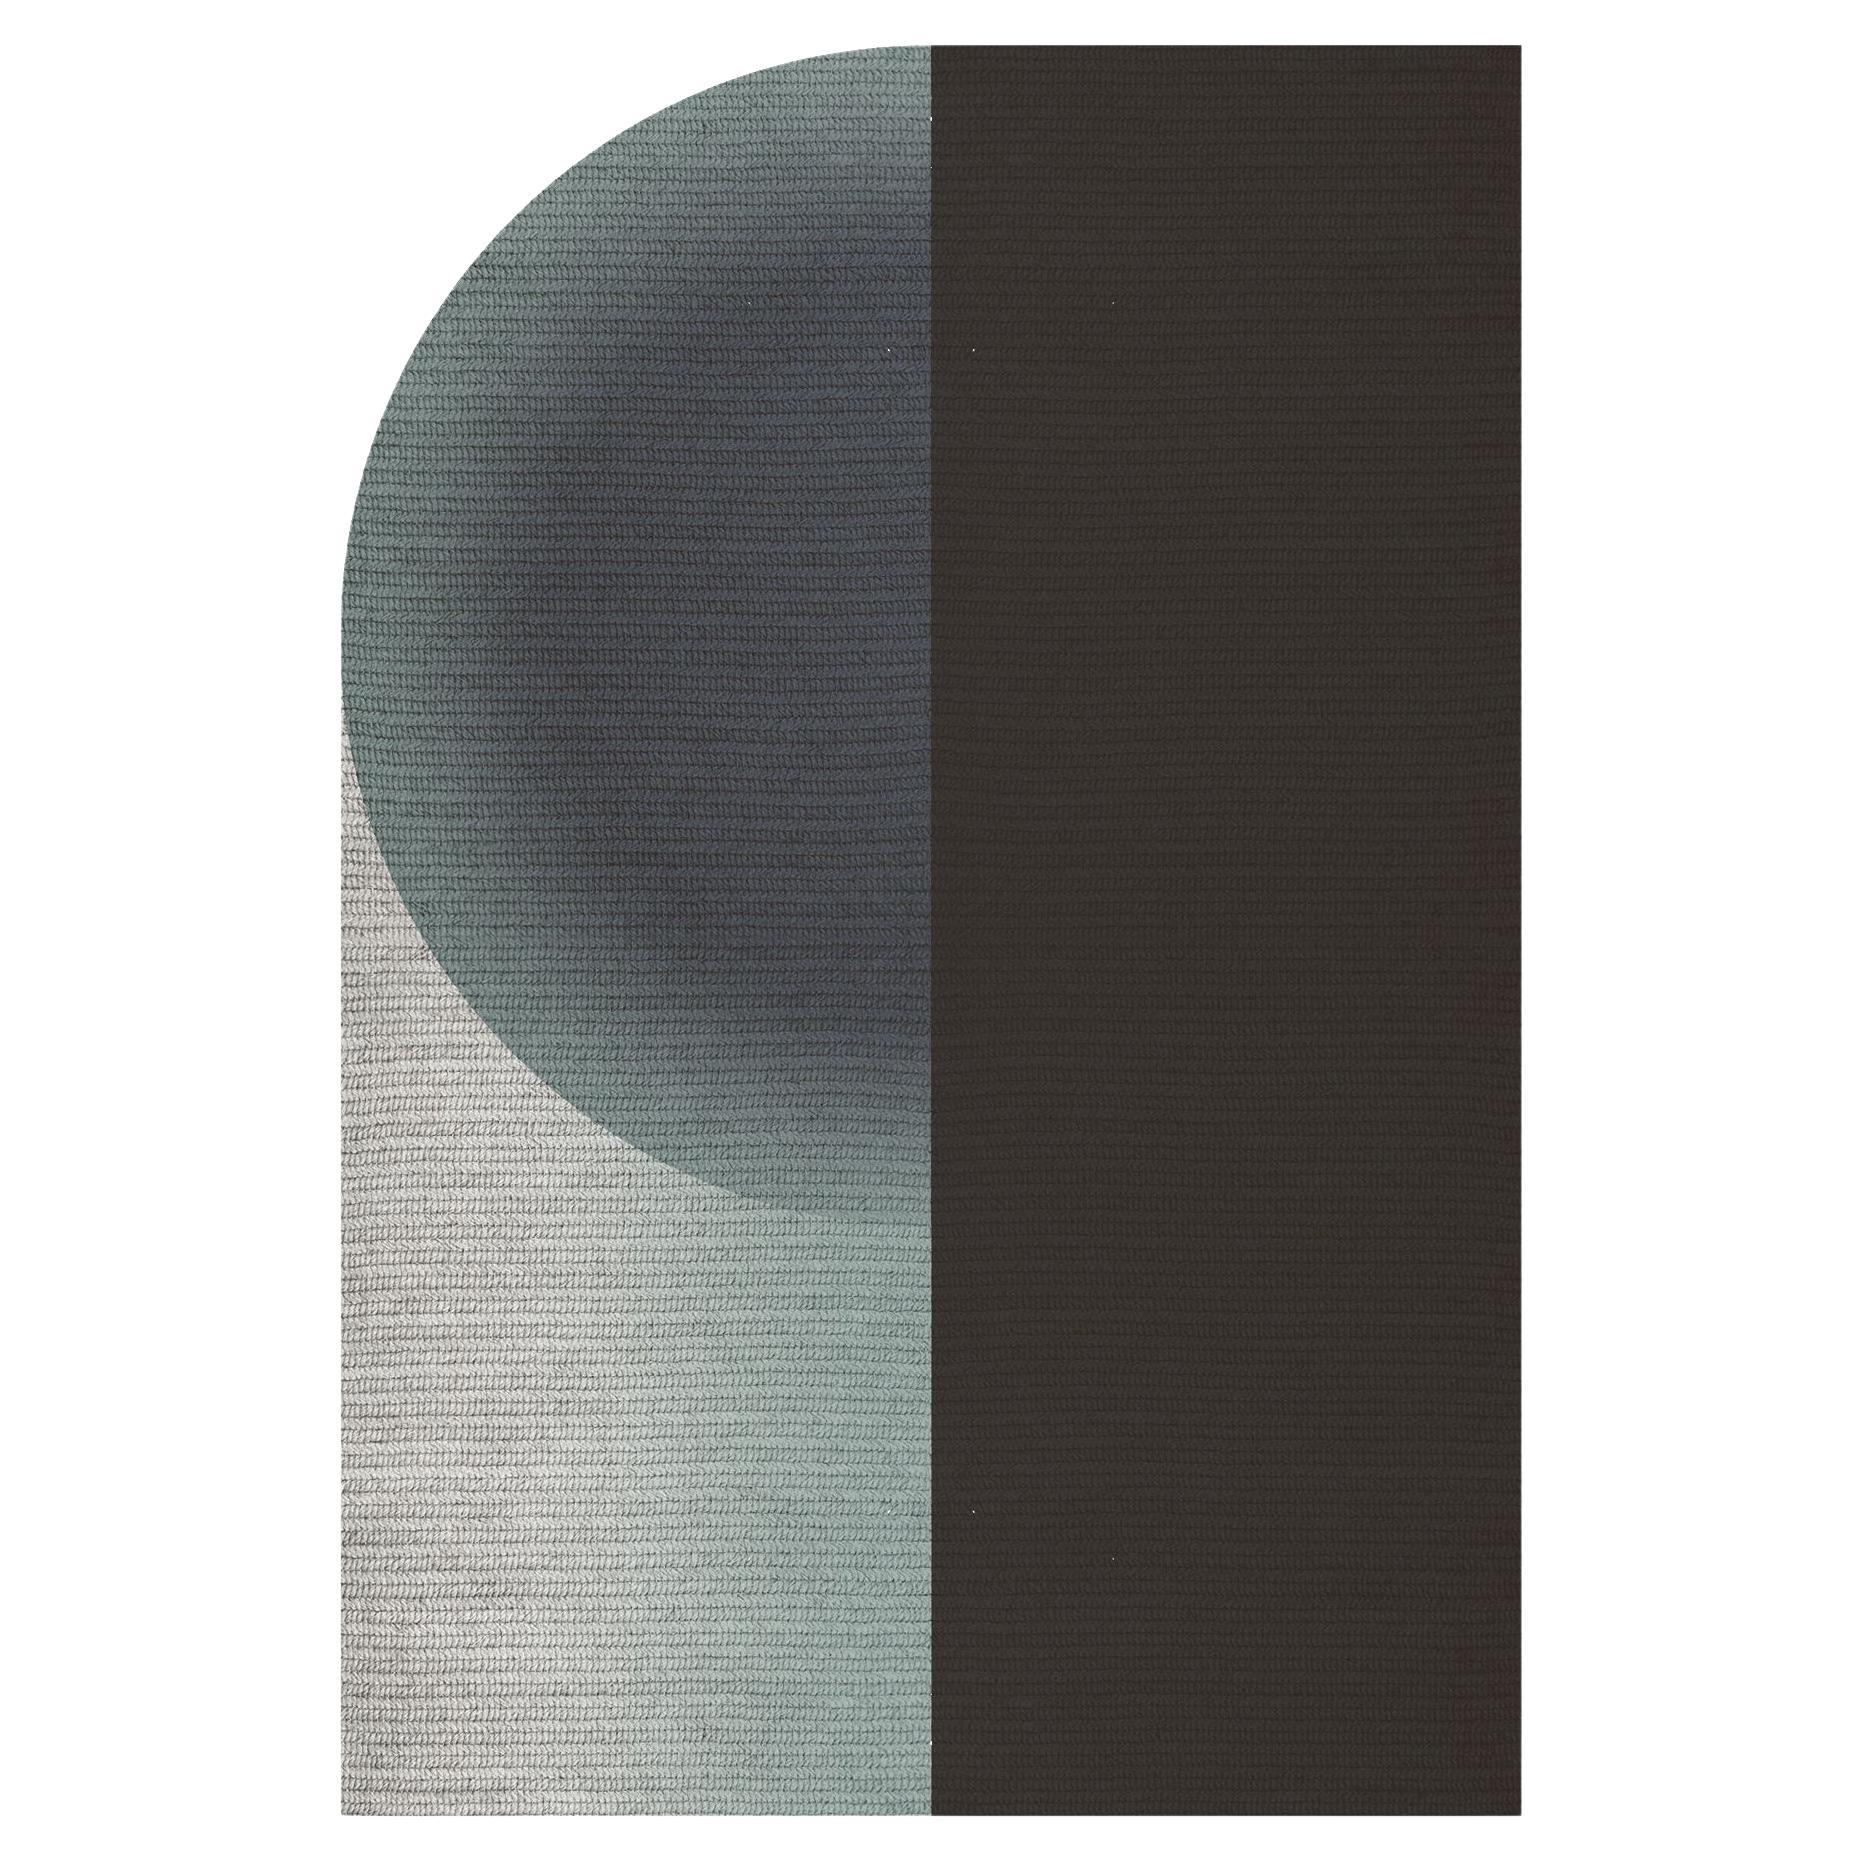 Claire Vos for Musett 'Glow' Abaca Indoor Rug in Sterling, in 160 x 240 cm For Sale